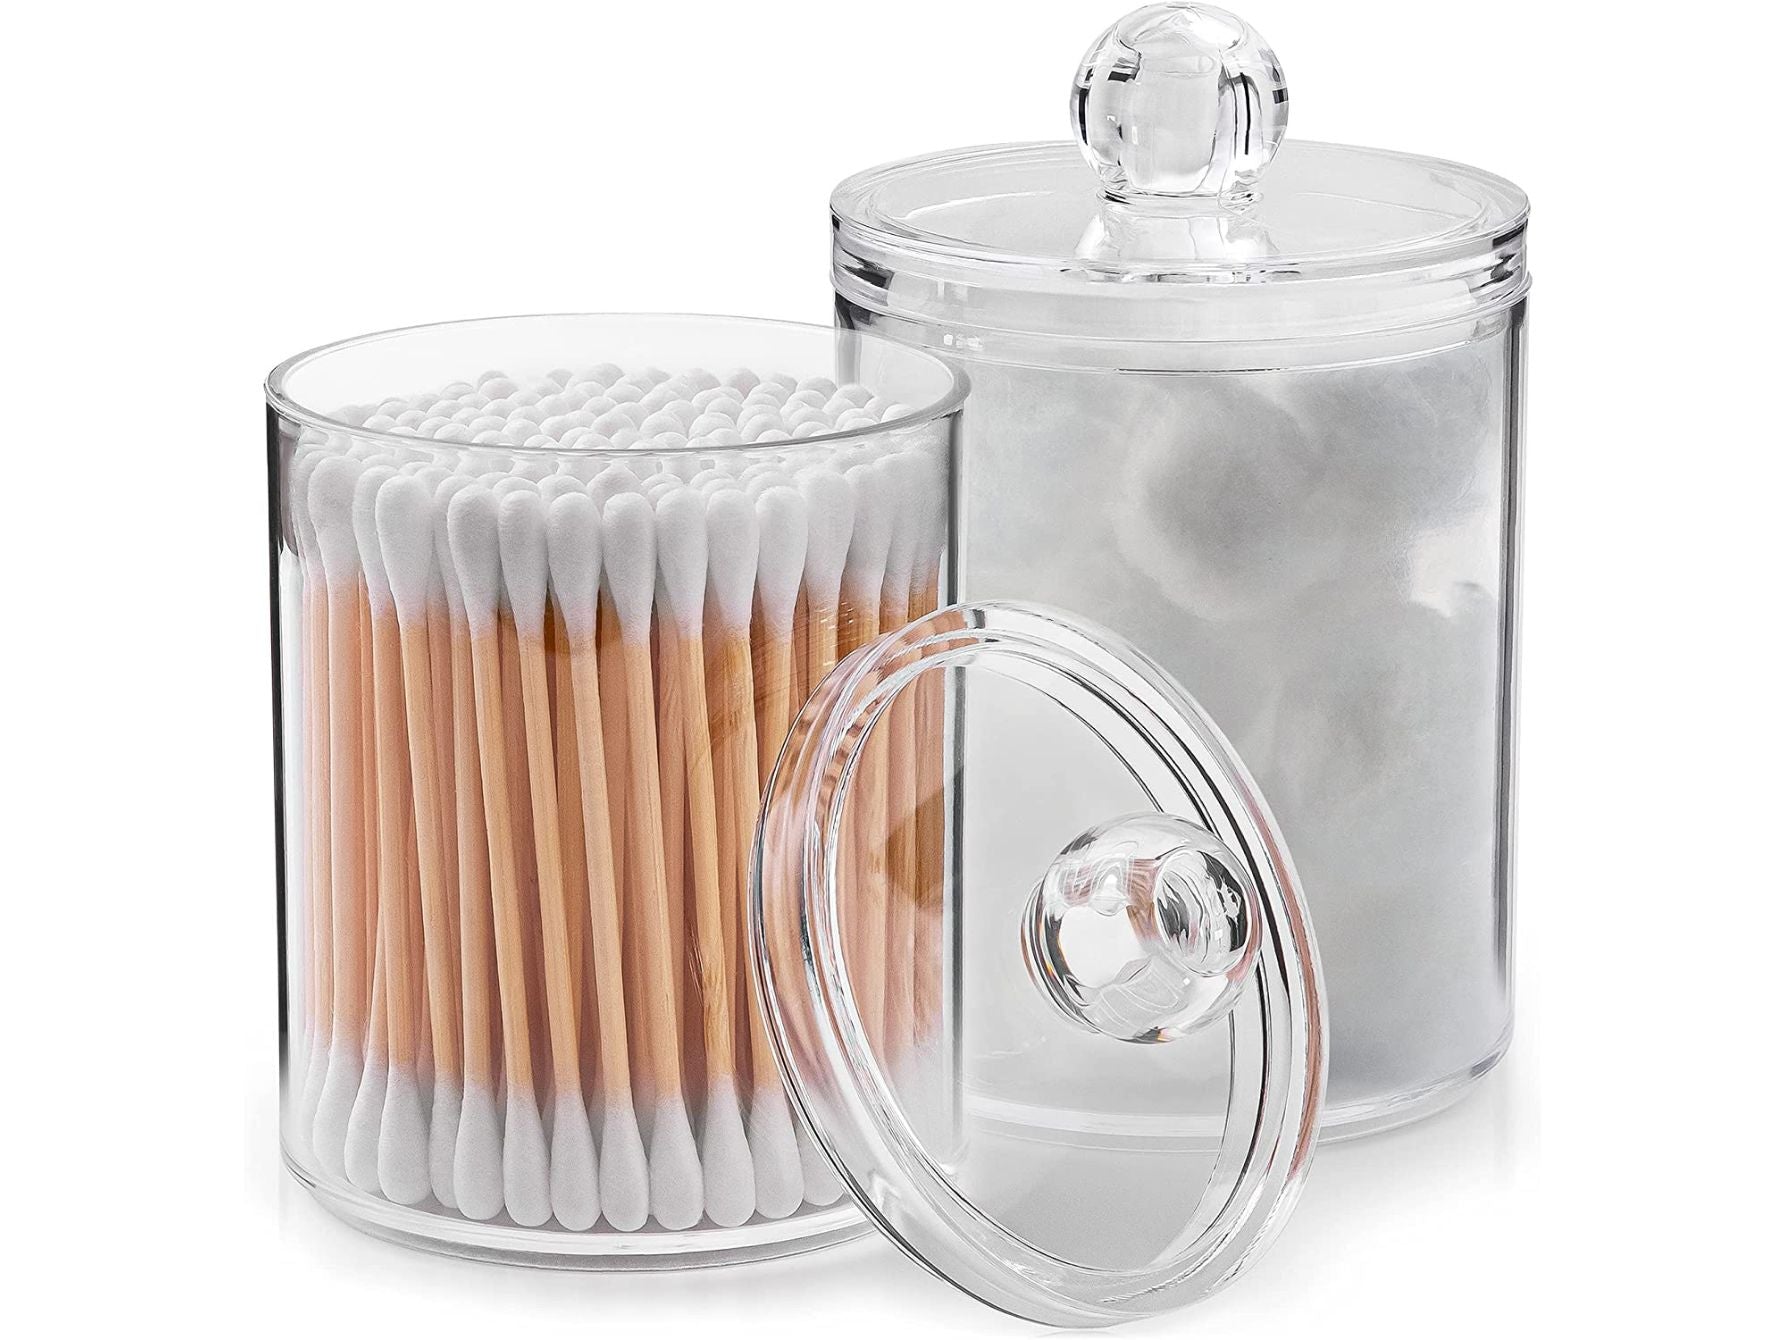 Qtip Holder Bathroom Canisters vy Zulay Kitchen